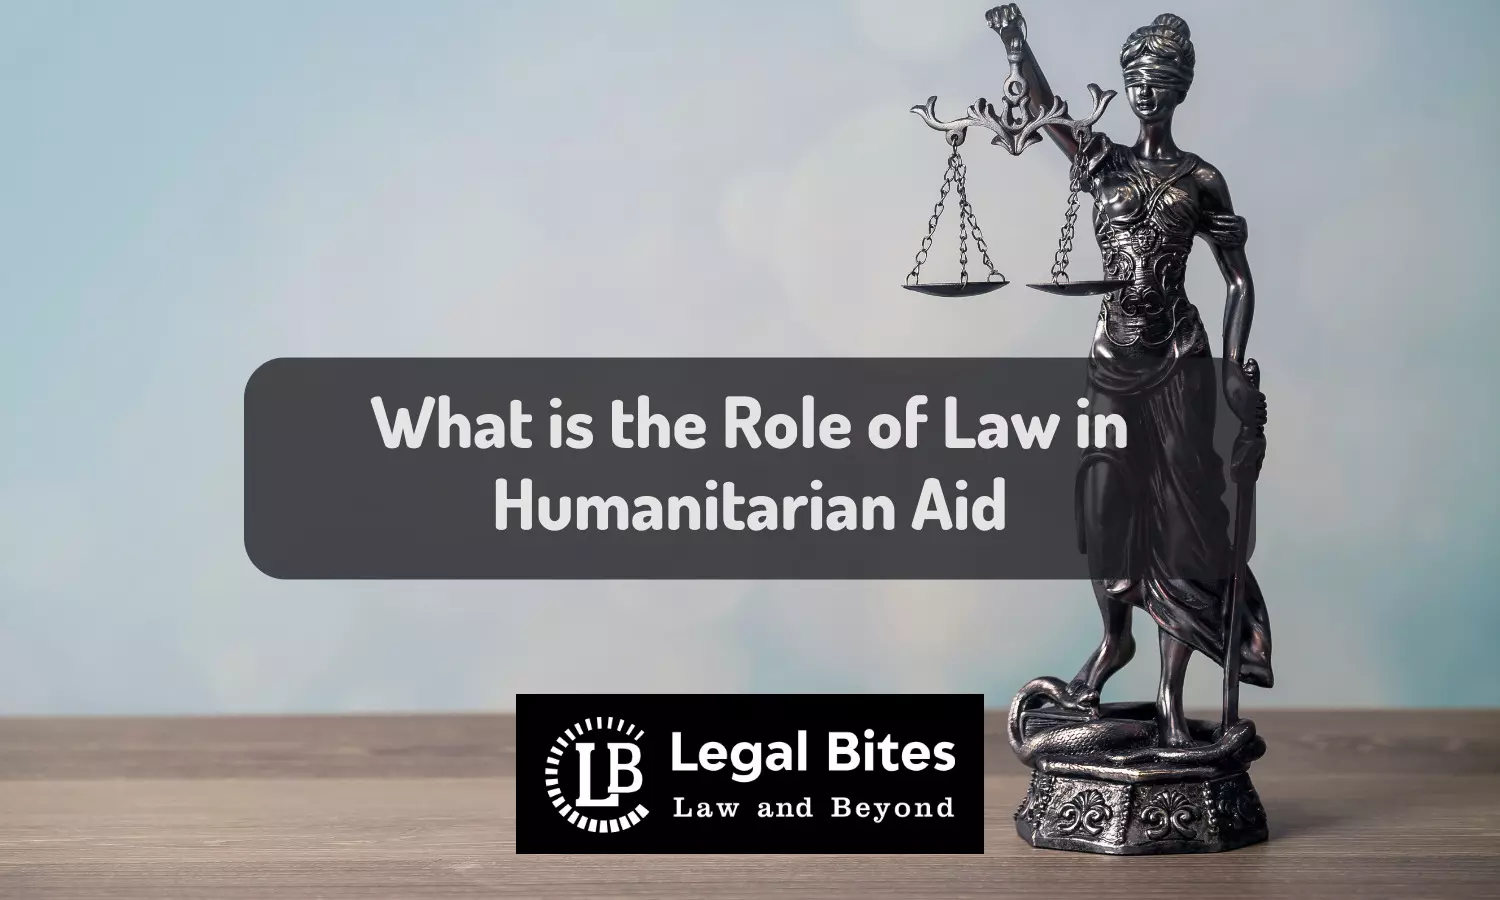 What is the Role of Law in Humanitarian Aid?